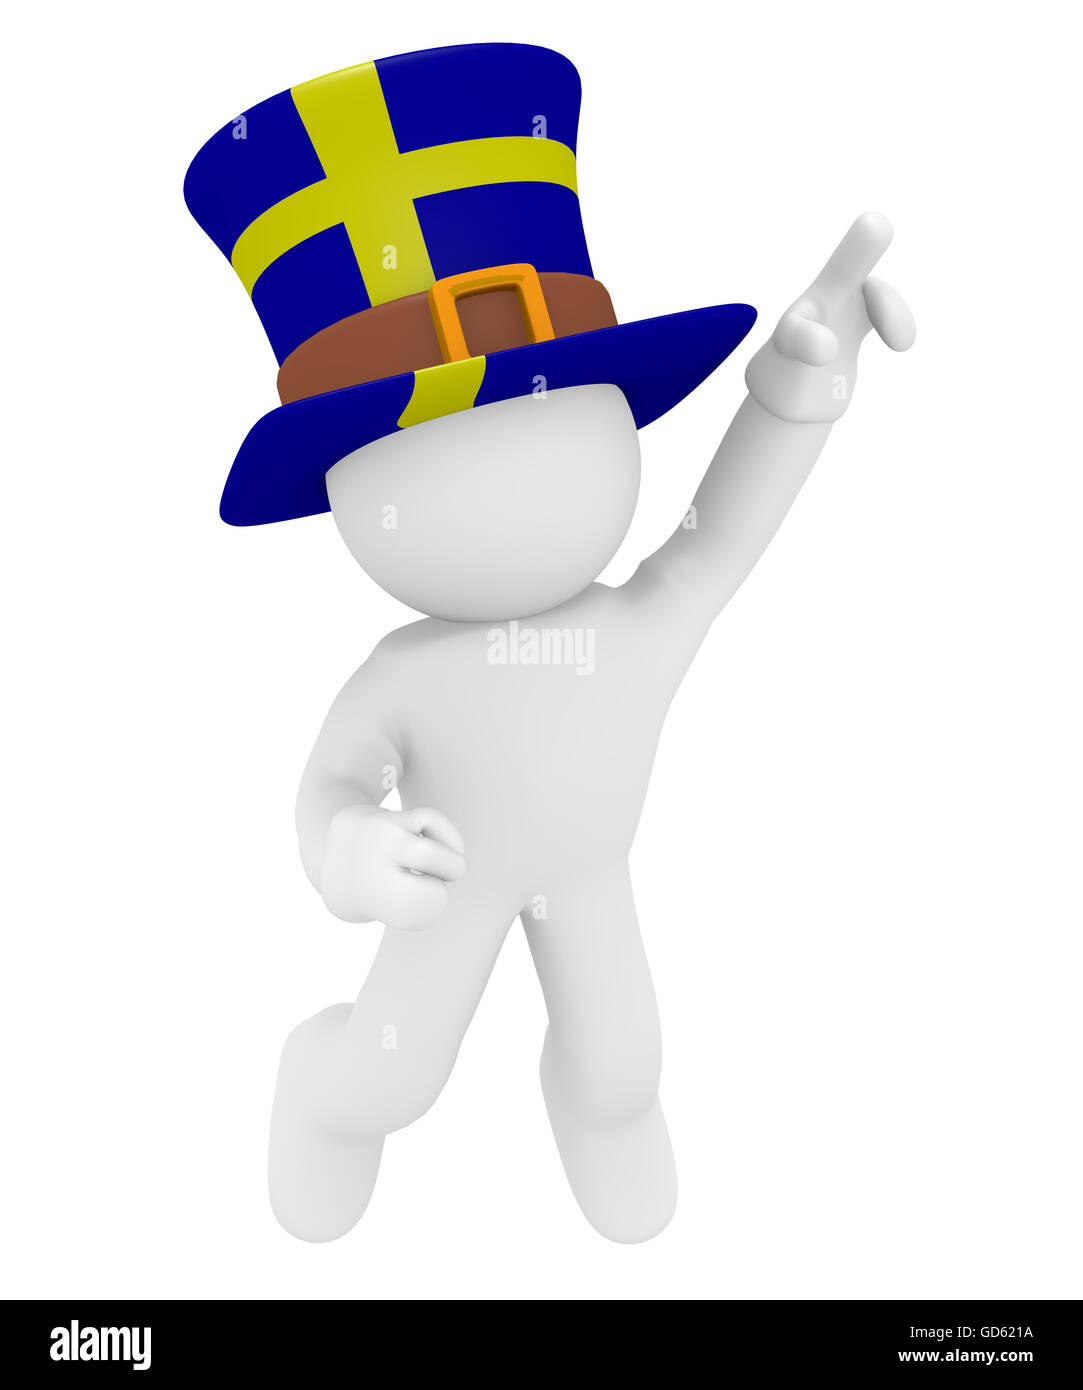 Swedish fan jumping high with the flag of Sweden on his hat 3d rendering Stock Photo